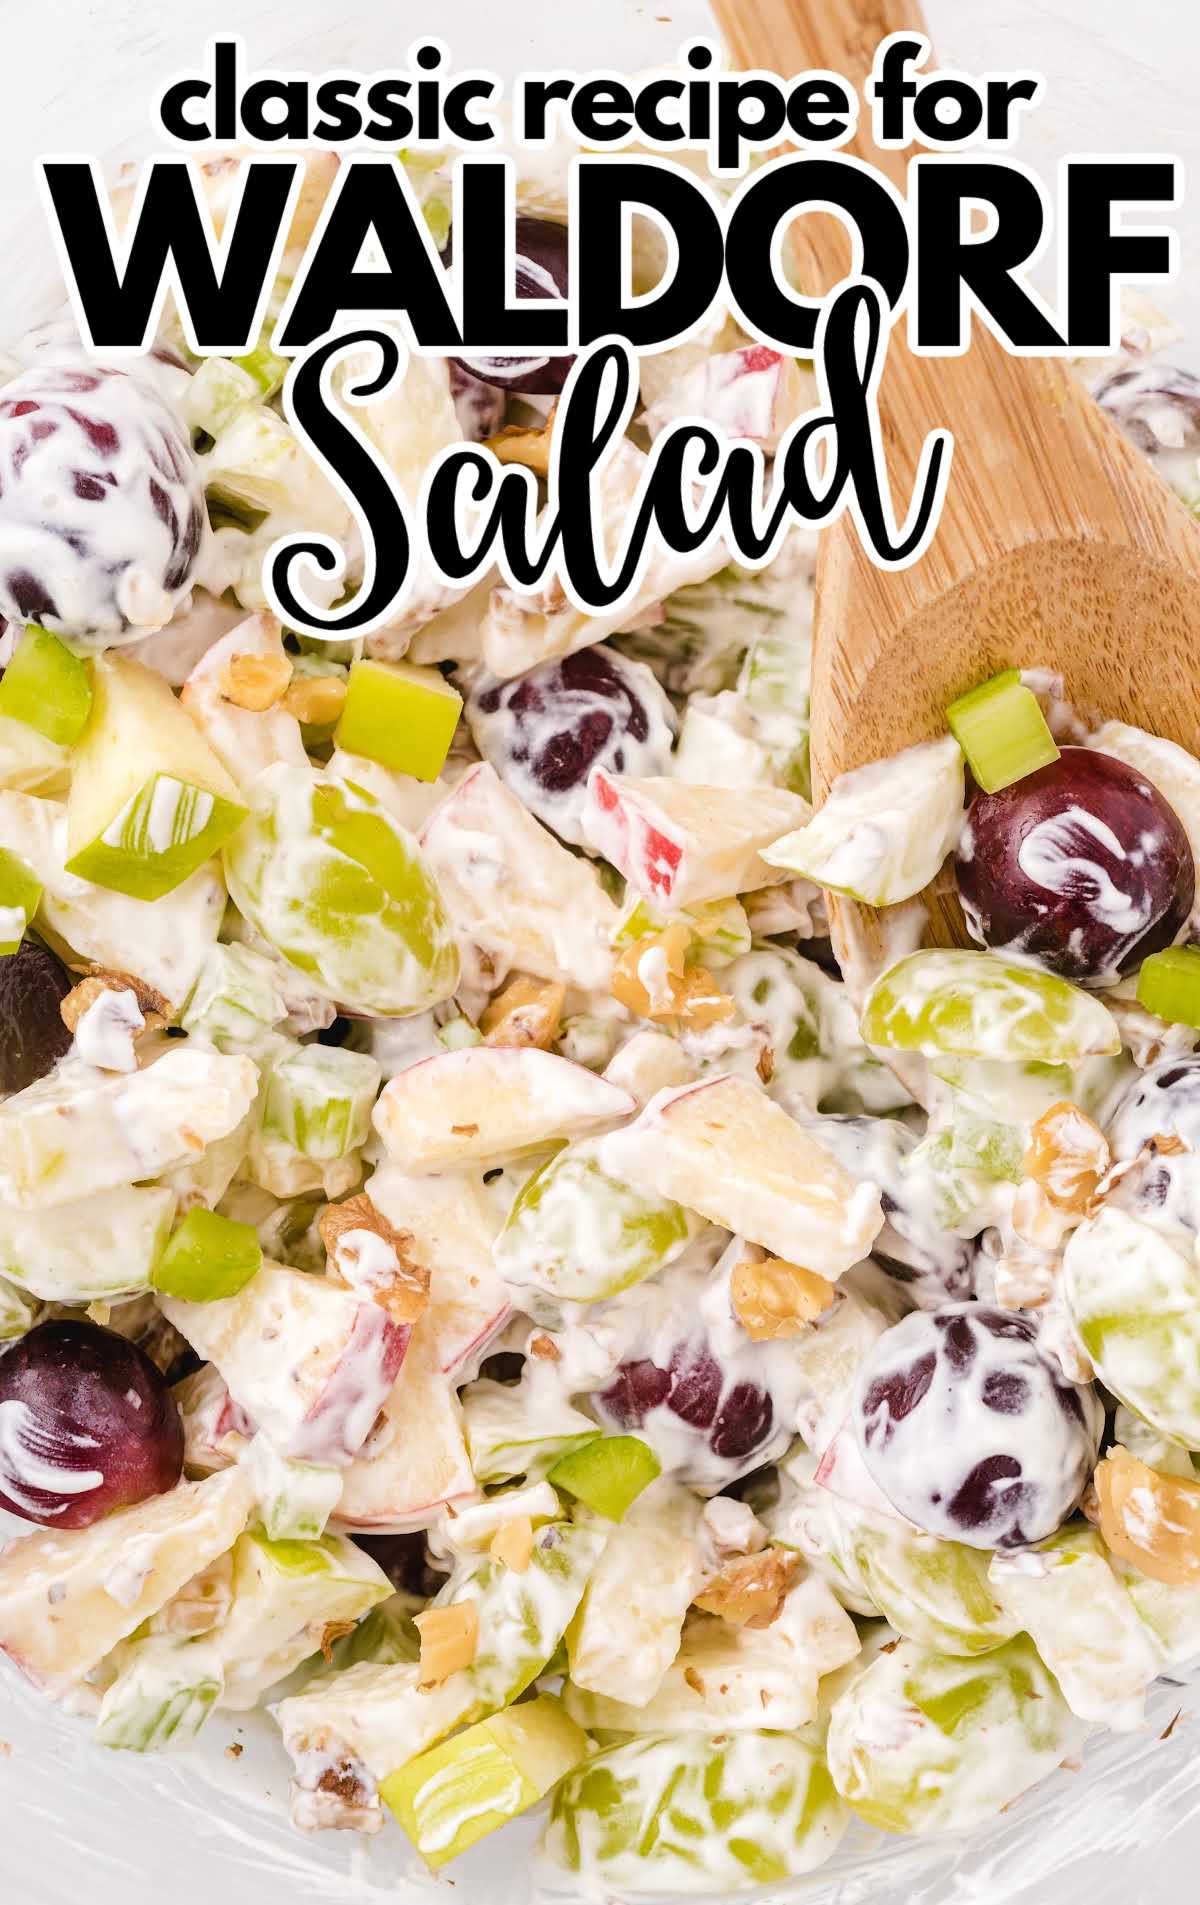 A close up of food, with Waldorf salad